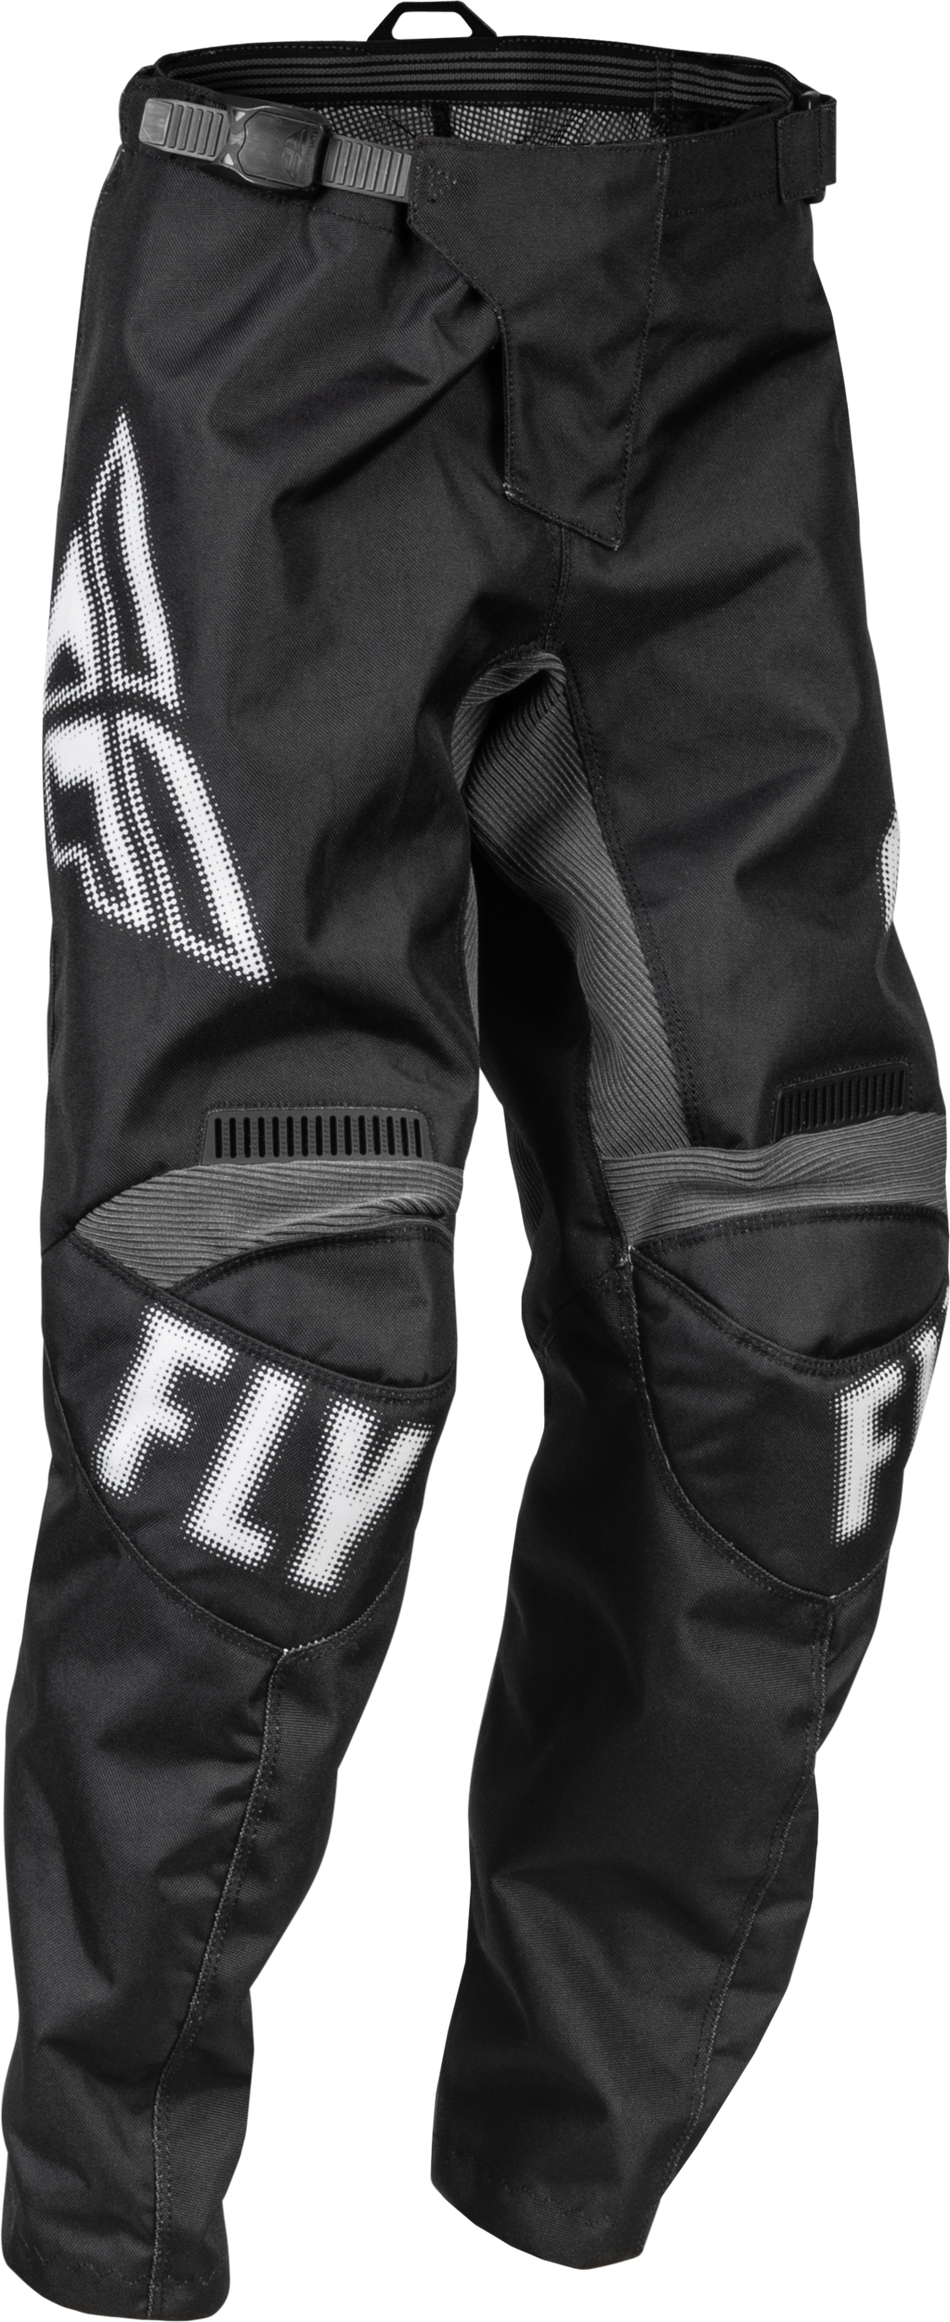 FLY RACING Youth F-16 Pants Black/White Sz 20 376-23220